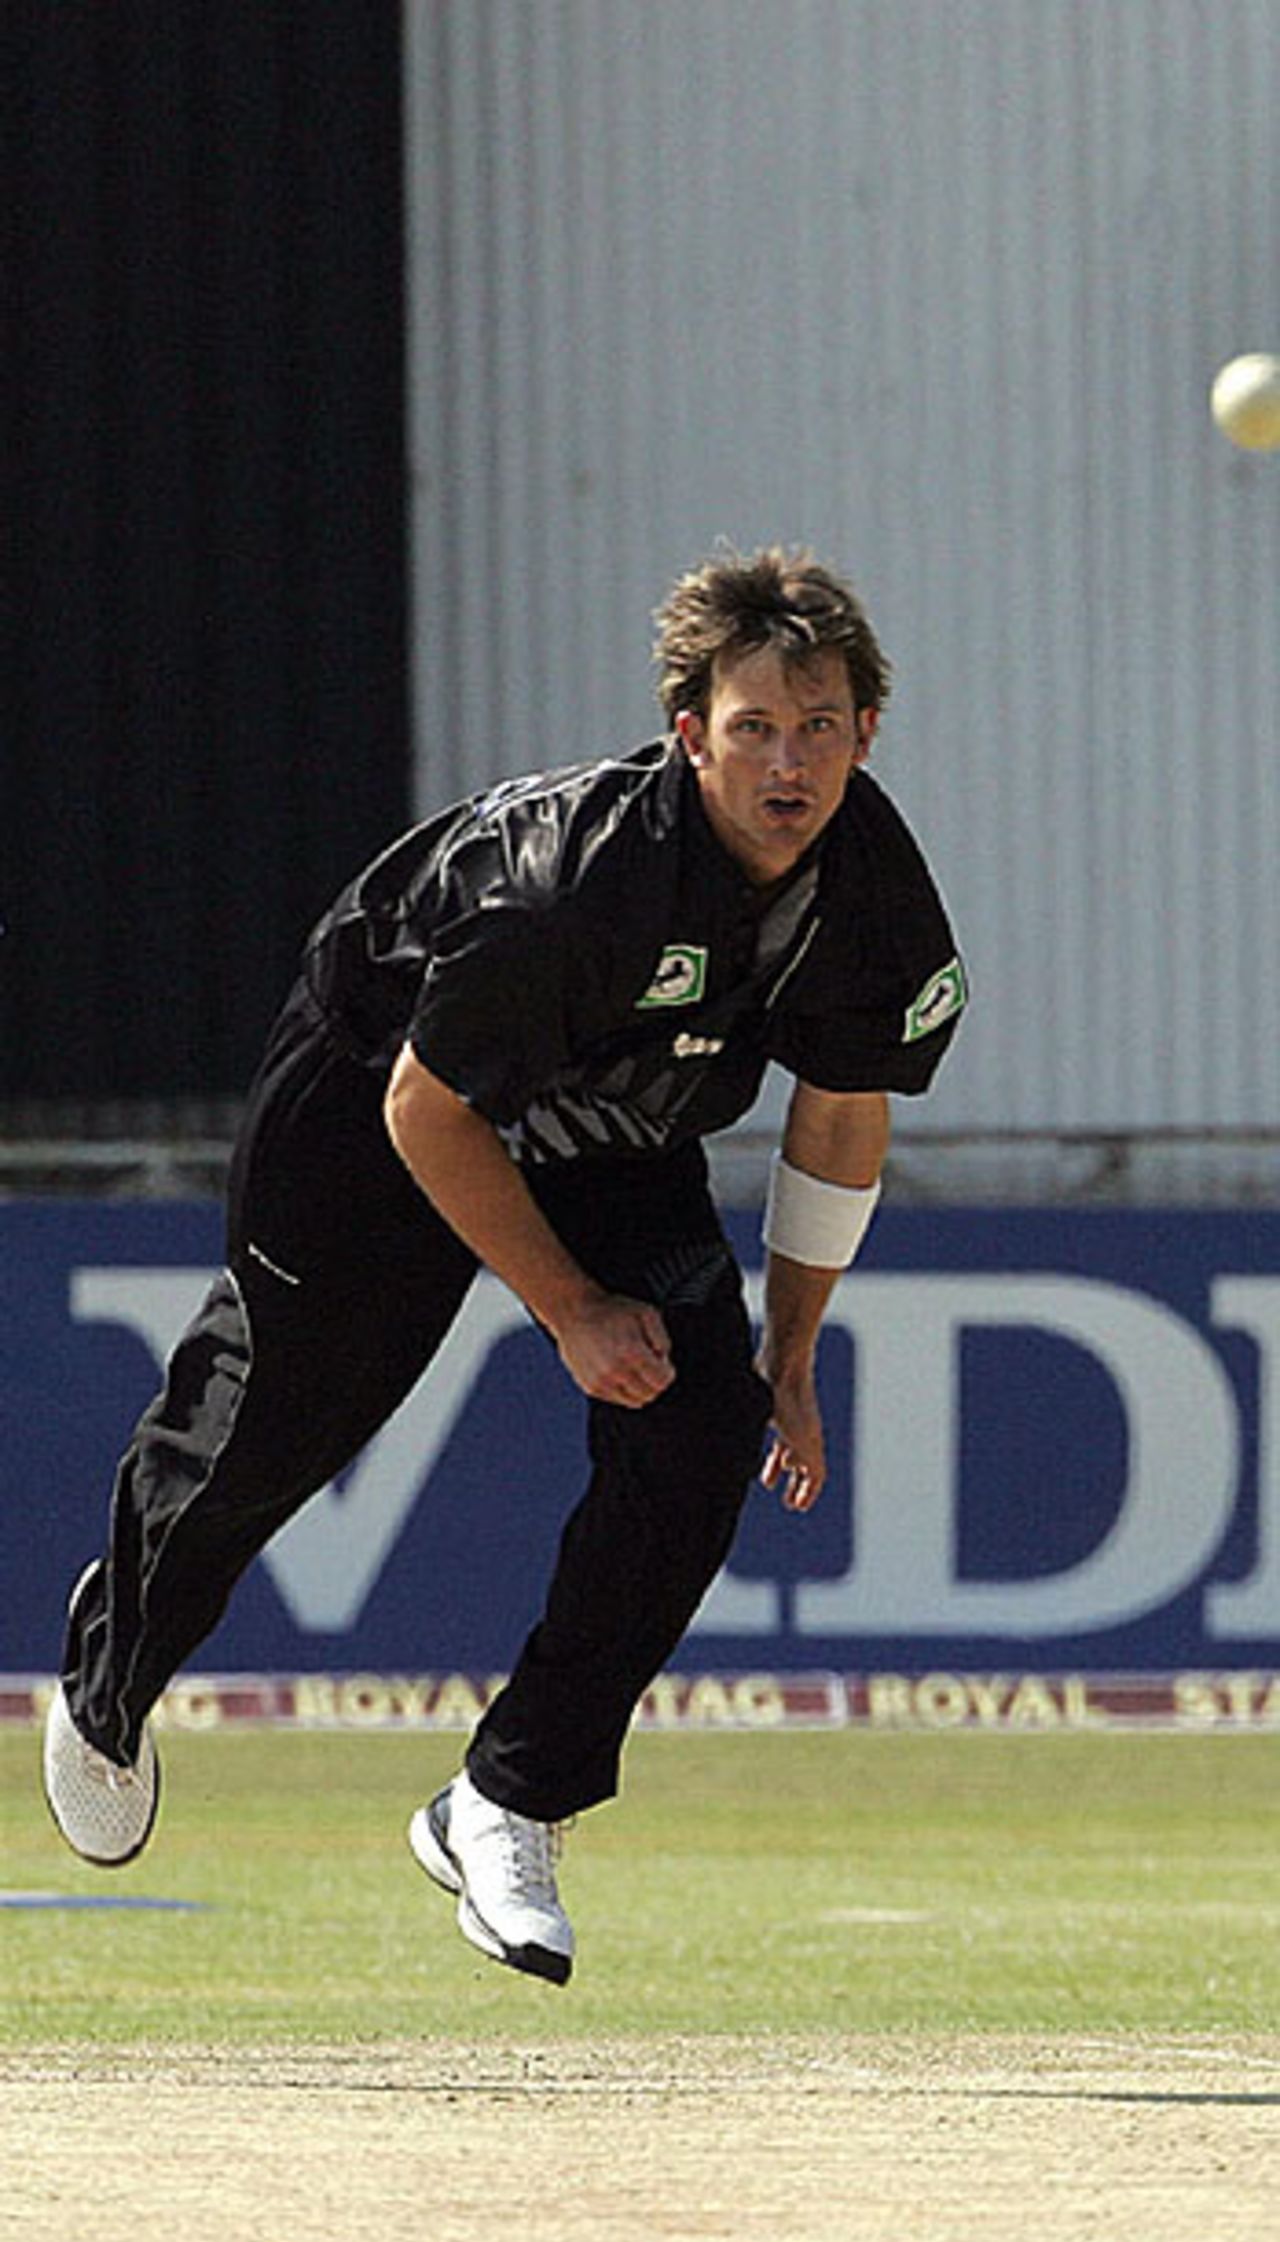 Shane Bond bowls to Sourav Ganguly at the start of his fiery spell, New Zealand v India, Videocon tri-series, Harare, August 26, 2005